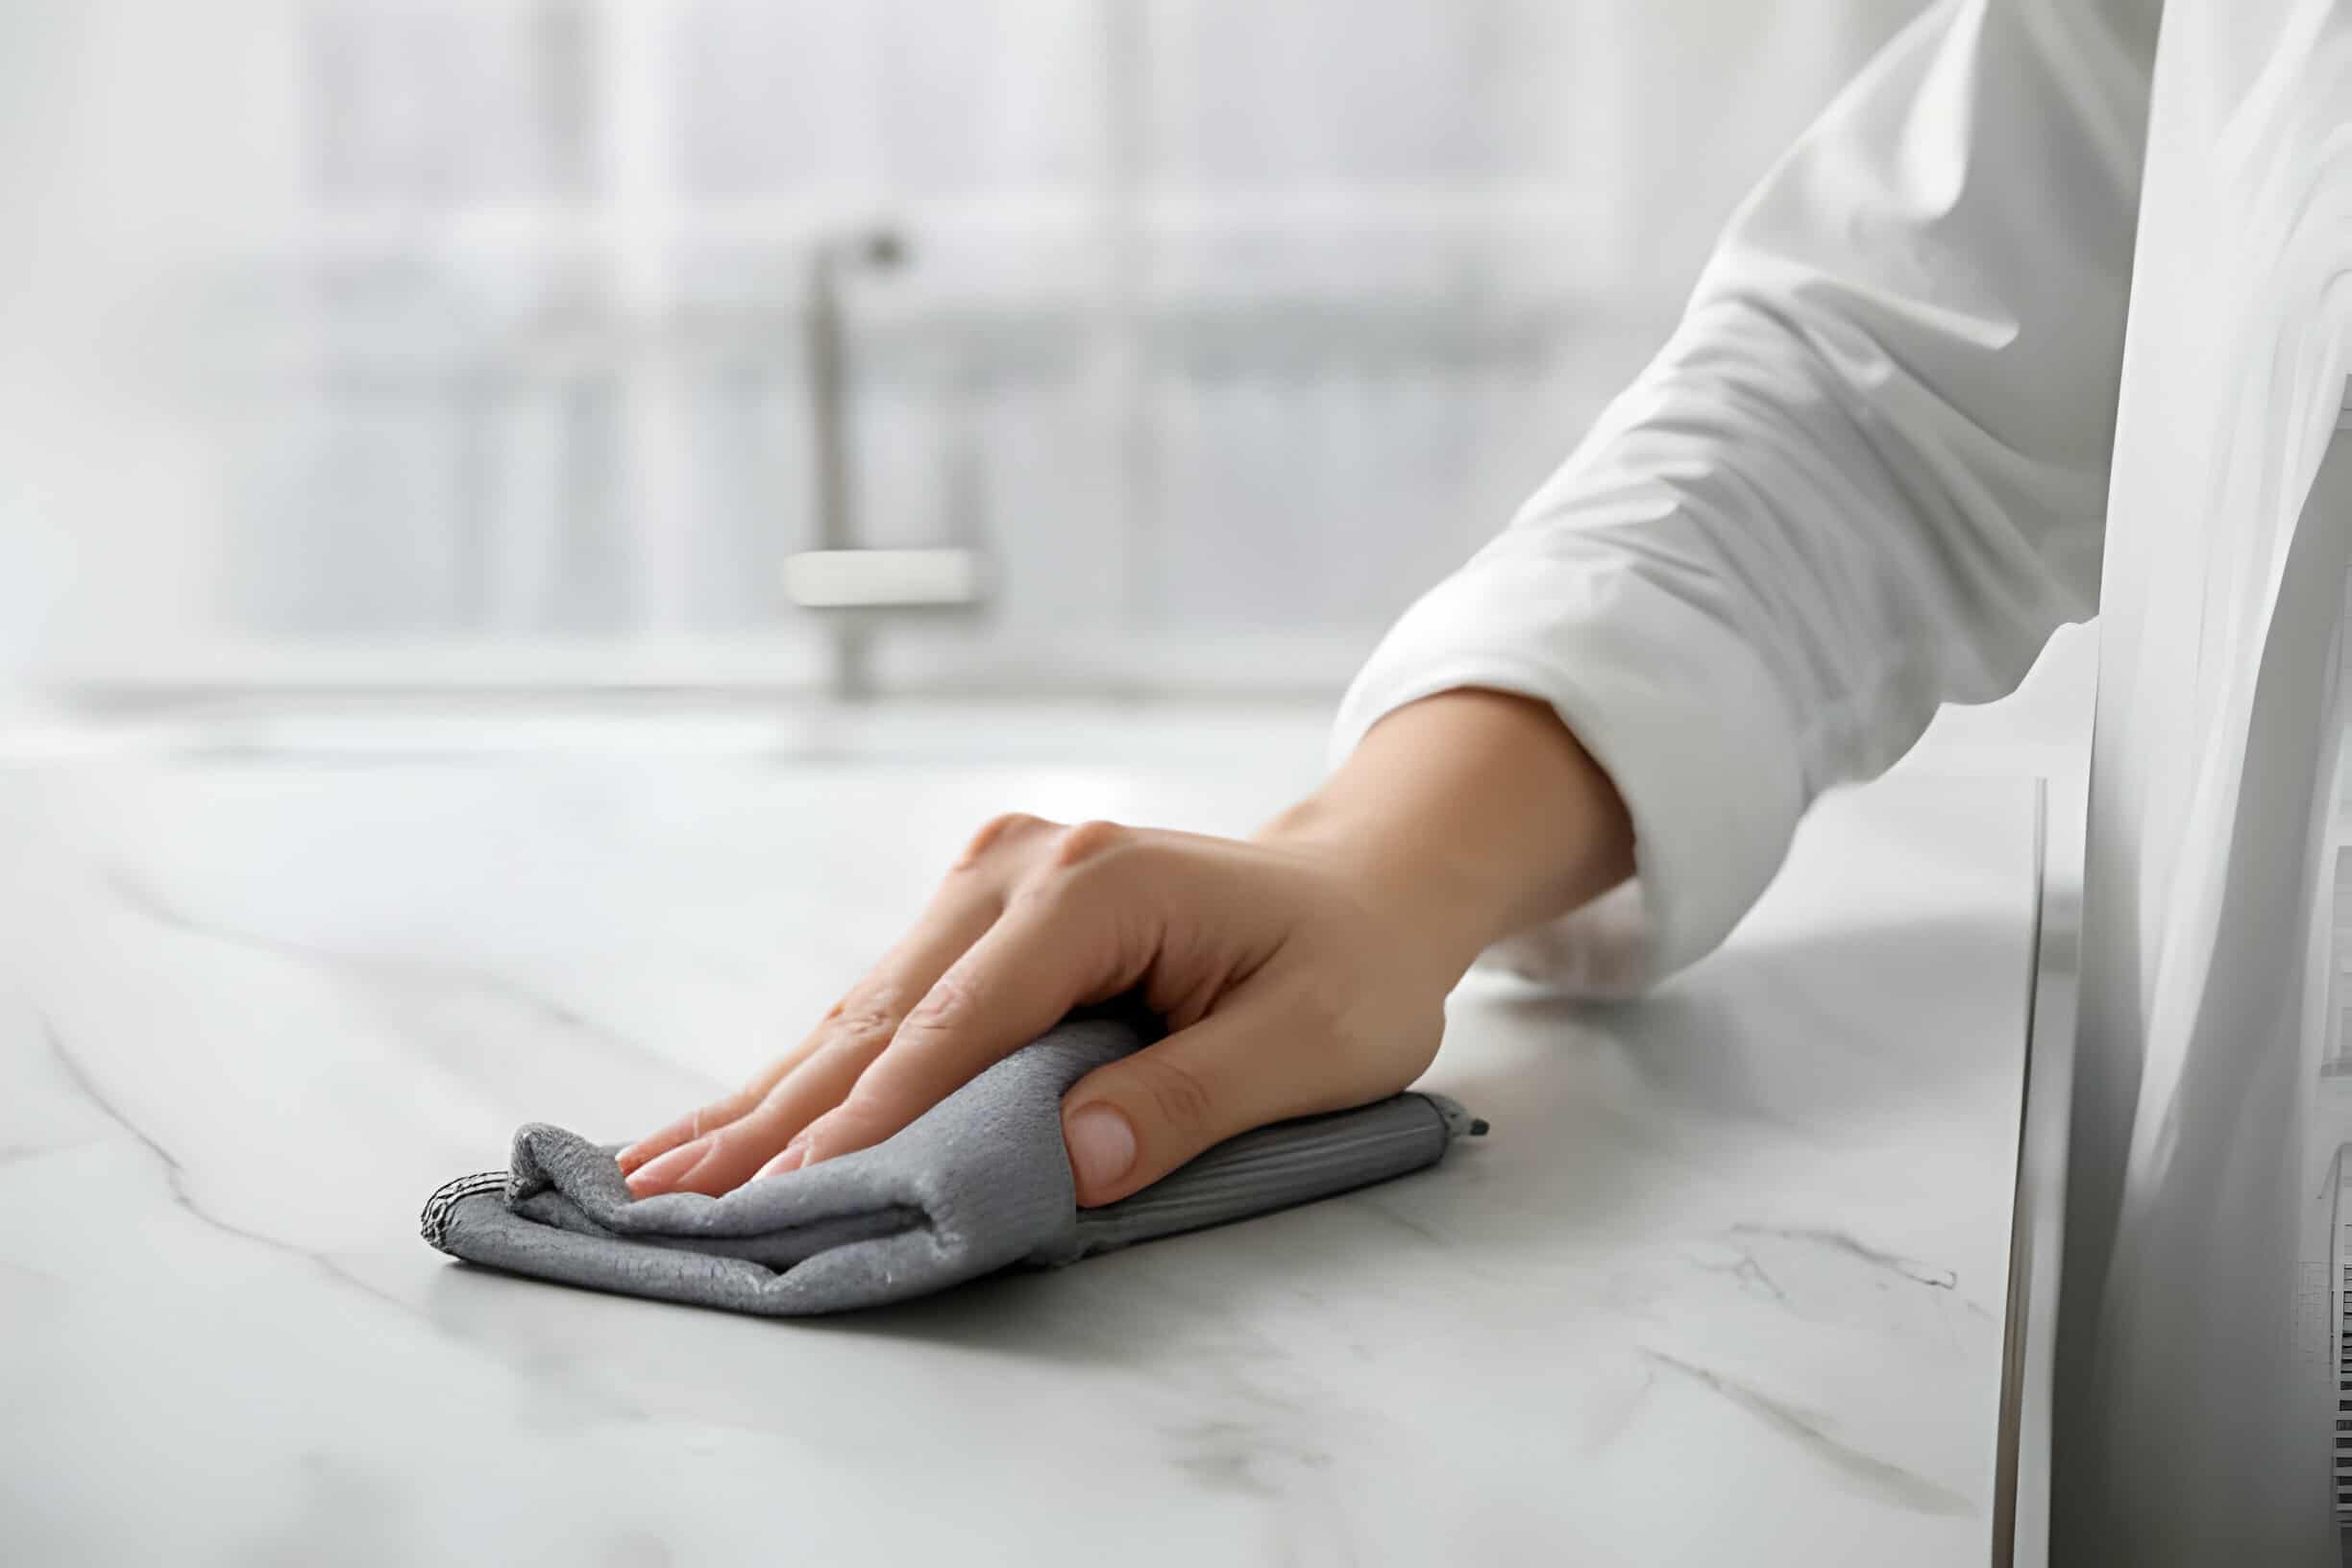 How to Clean Microfiber Cloths Tidyhere Image of a Woman Wiping Countertop with Microfiber